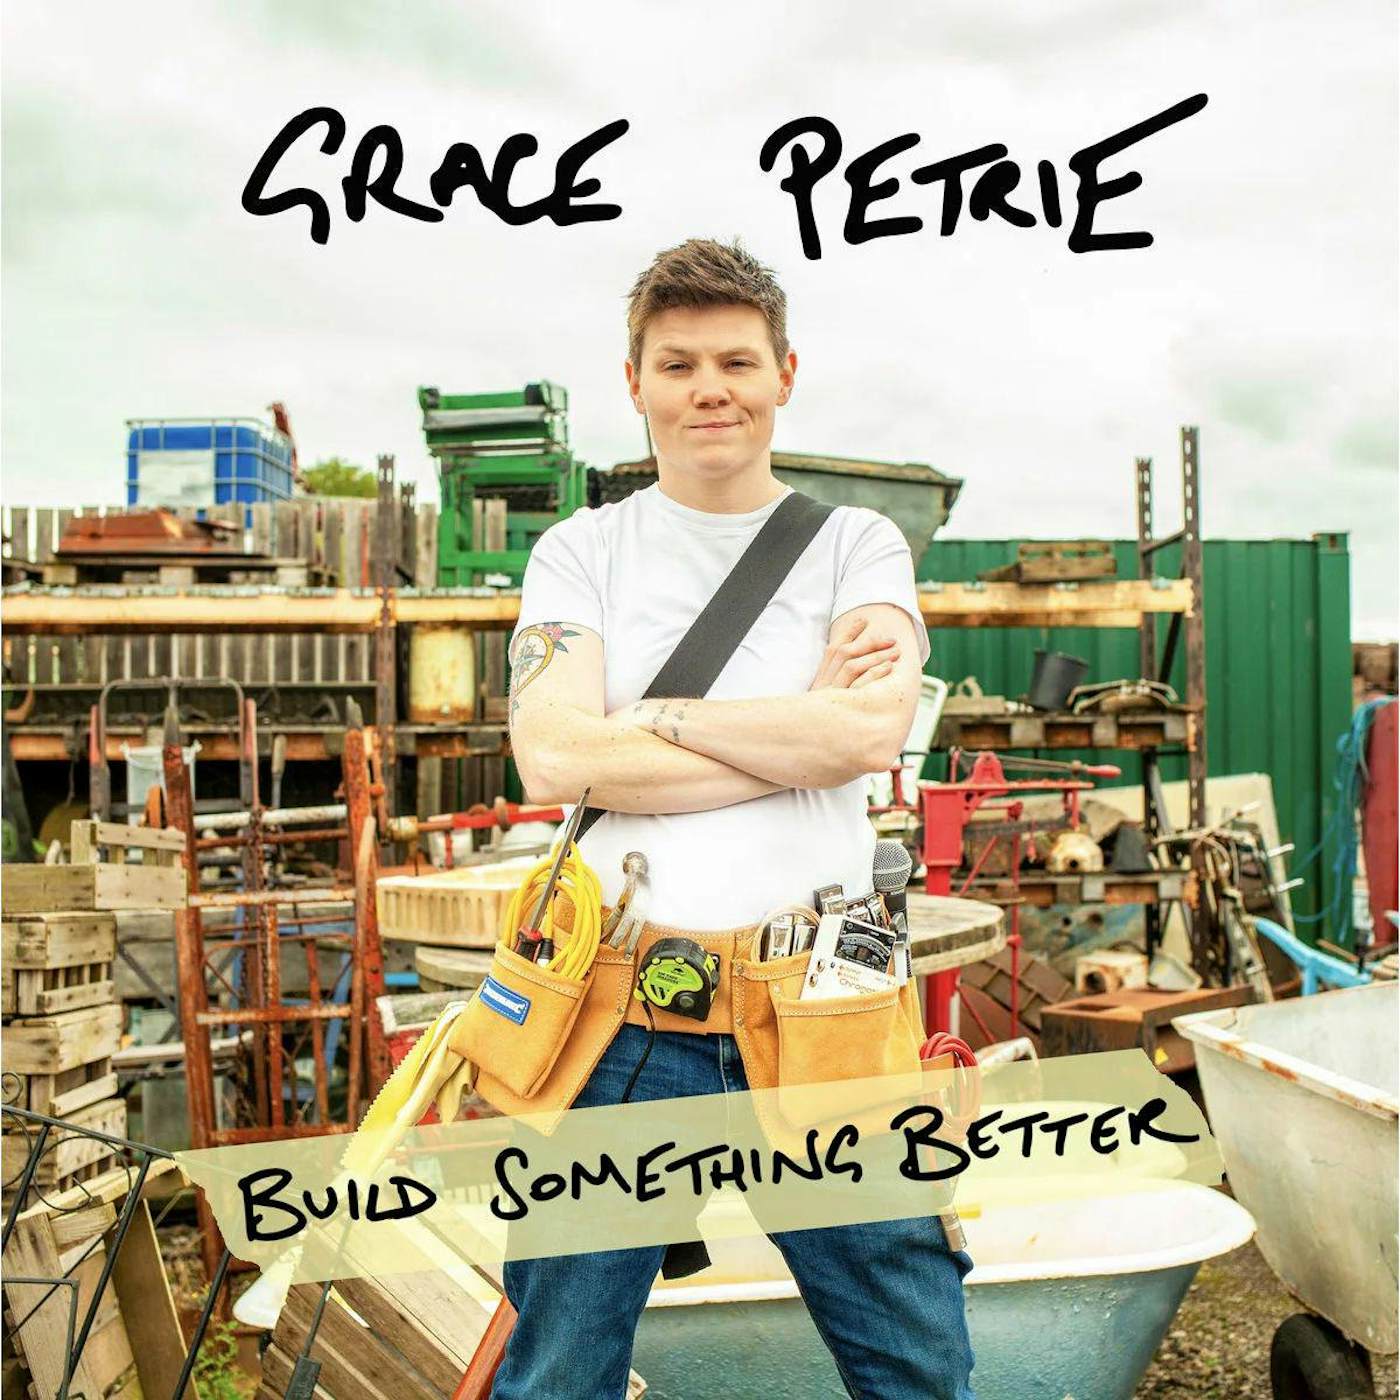 Grace Petrie Build Something Better (Limited) Vinyl Record